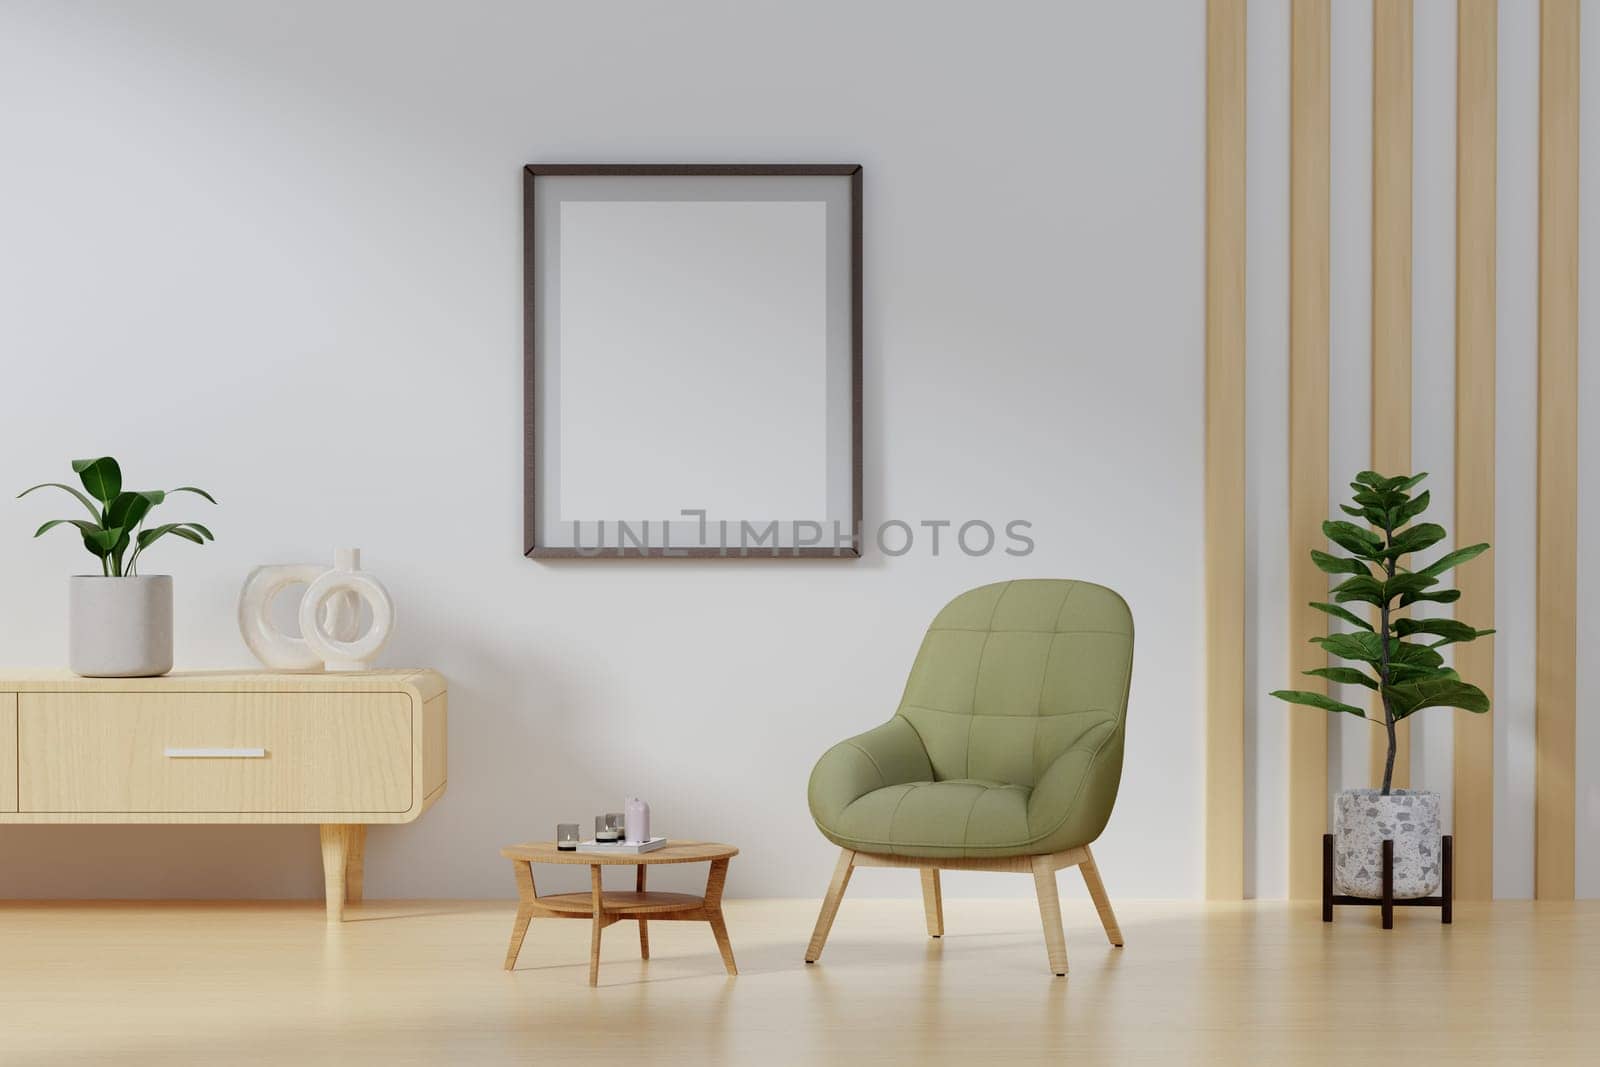 Blank vertical poster frame mock up in living room interior, modern living room interior background, green sofa. 3d rendering illustration by meepiangraphic